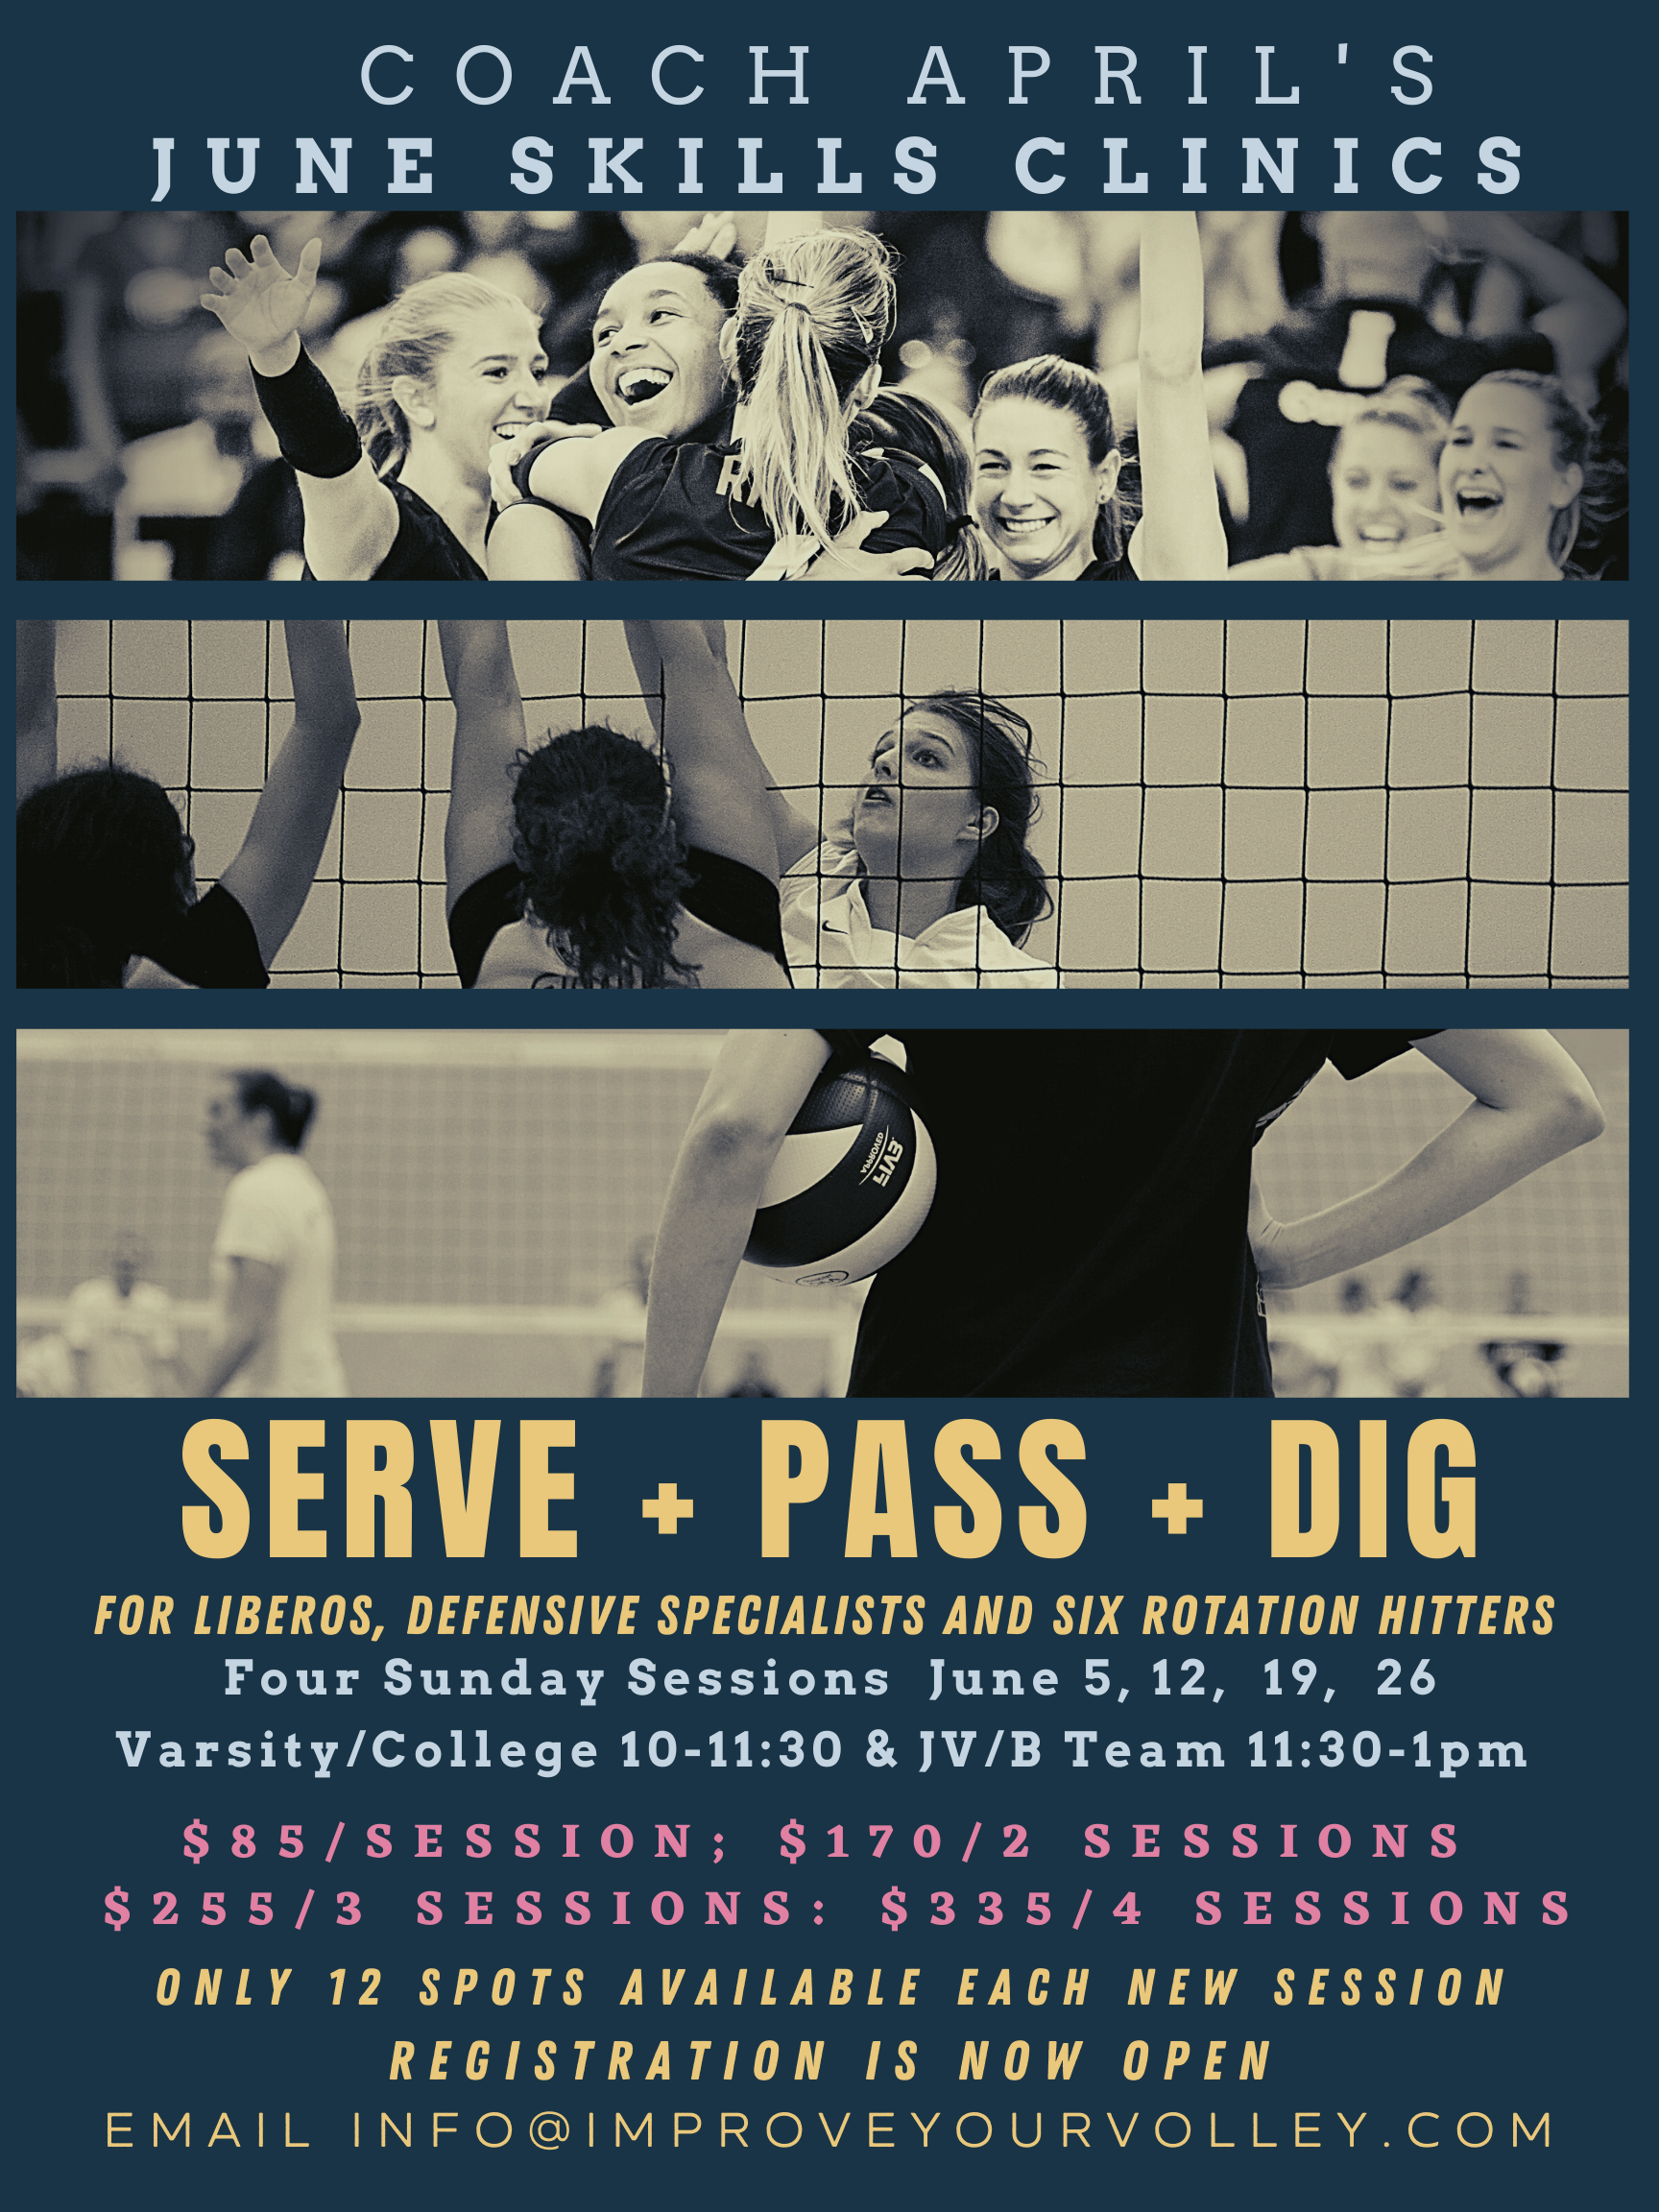 Reserve your sessions for private one-on-one training sessions during club season in January 2022. REGISTRATION is now Open for my month of MAY Serve/Dig/Pass Clinics. Email info@improveyourvolley.com